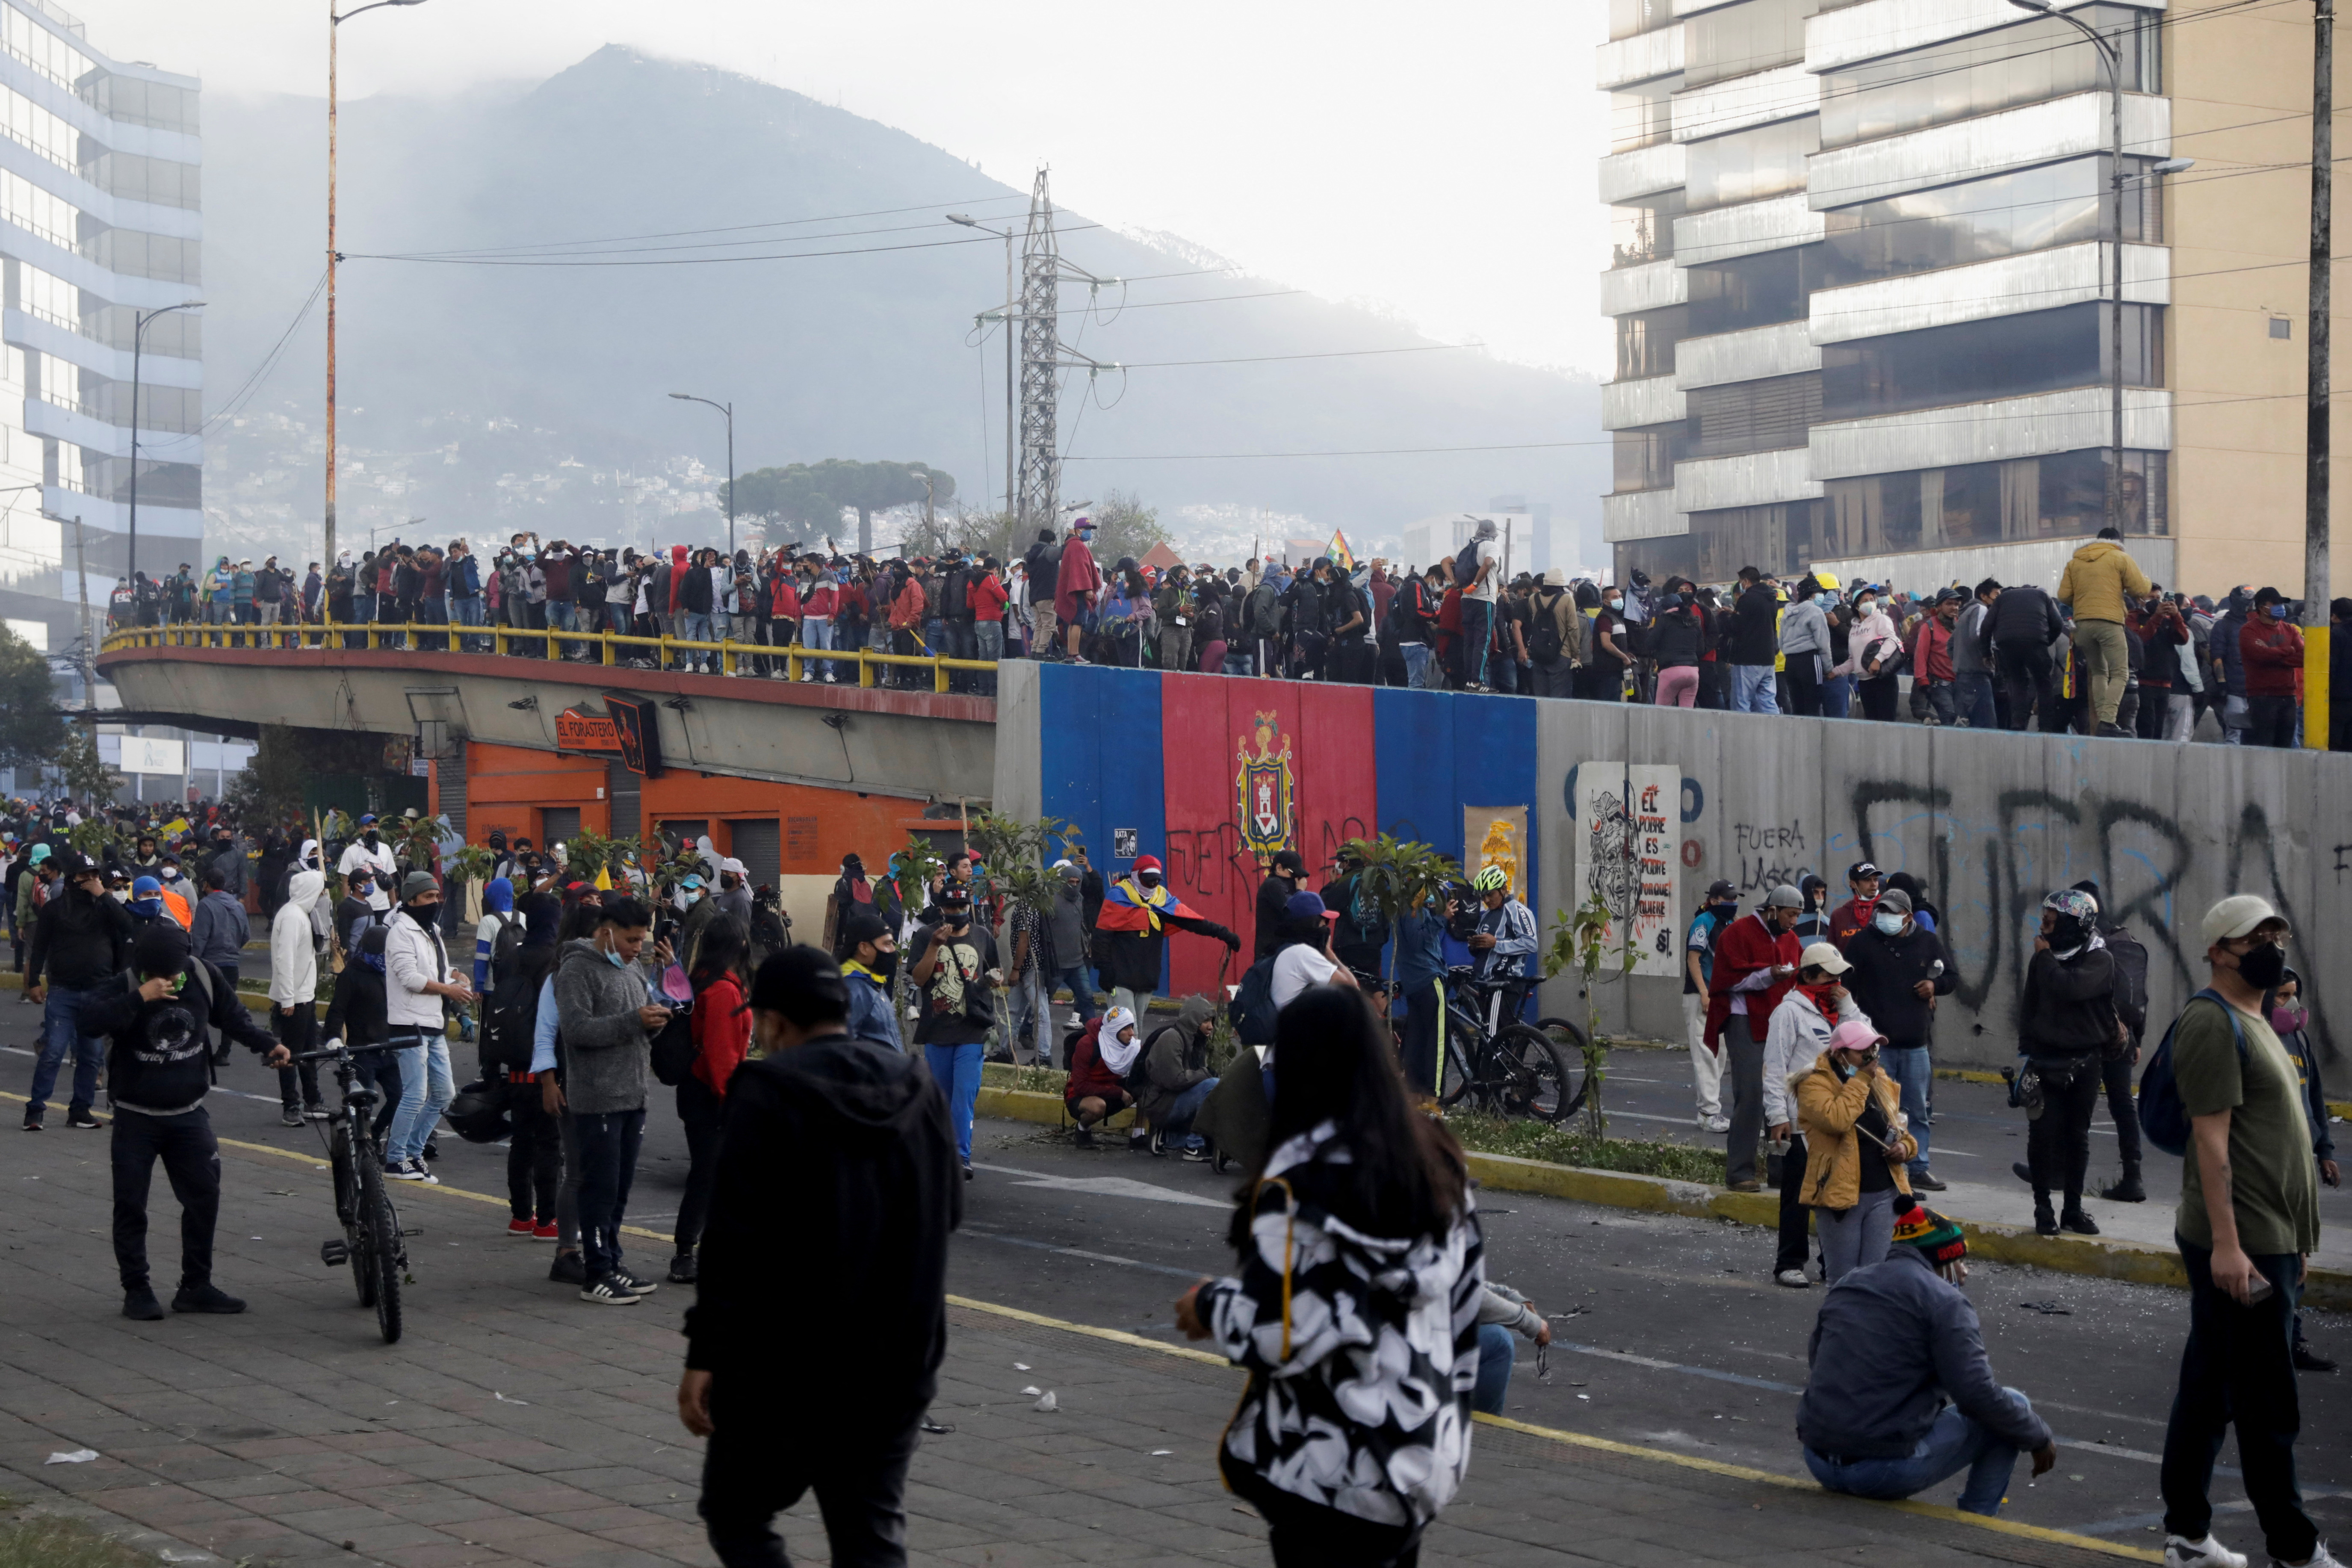 Indigenous protesters march through Quito demanding concessions from President Lasso